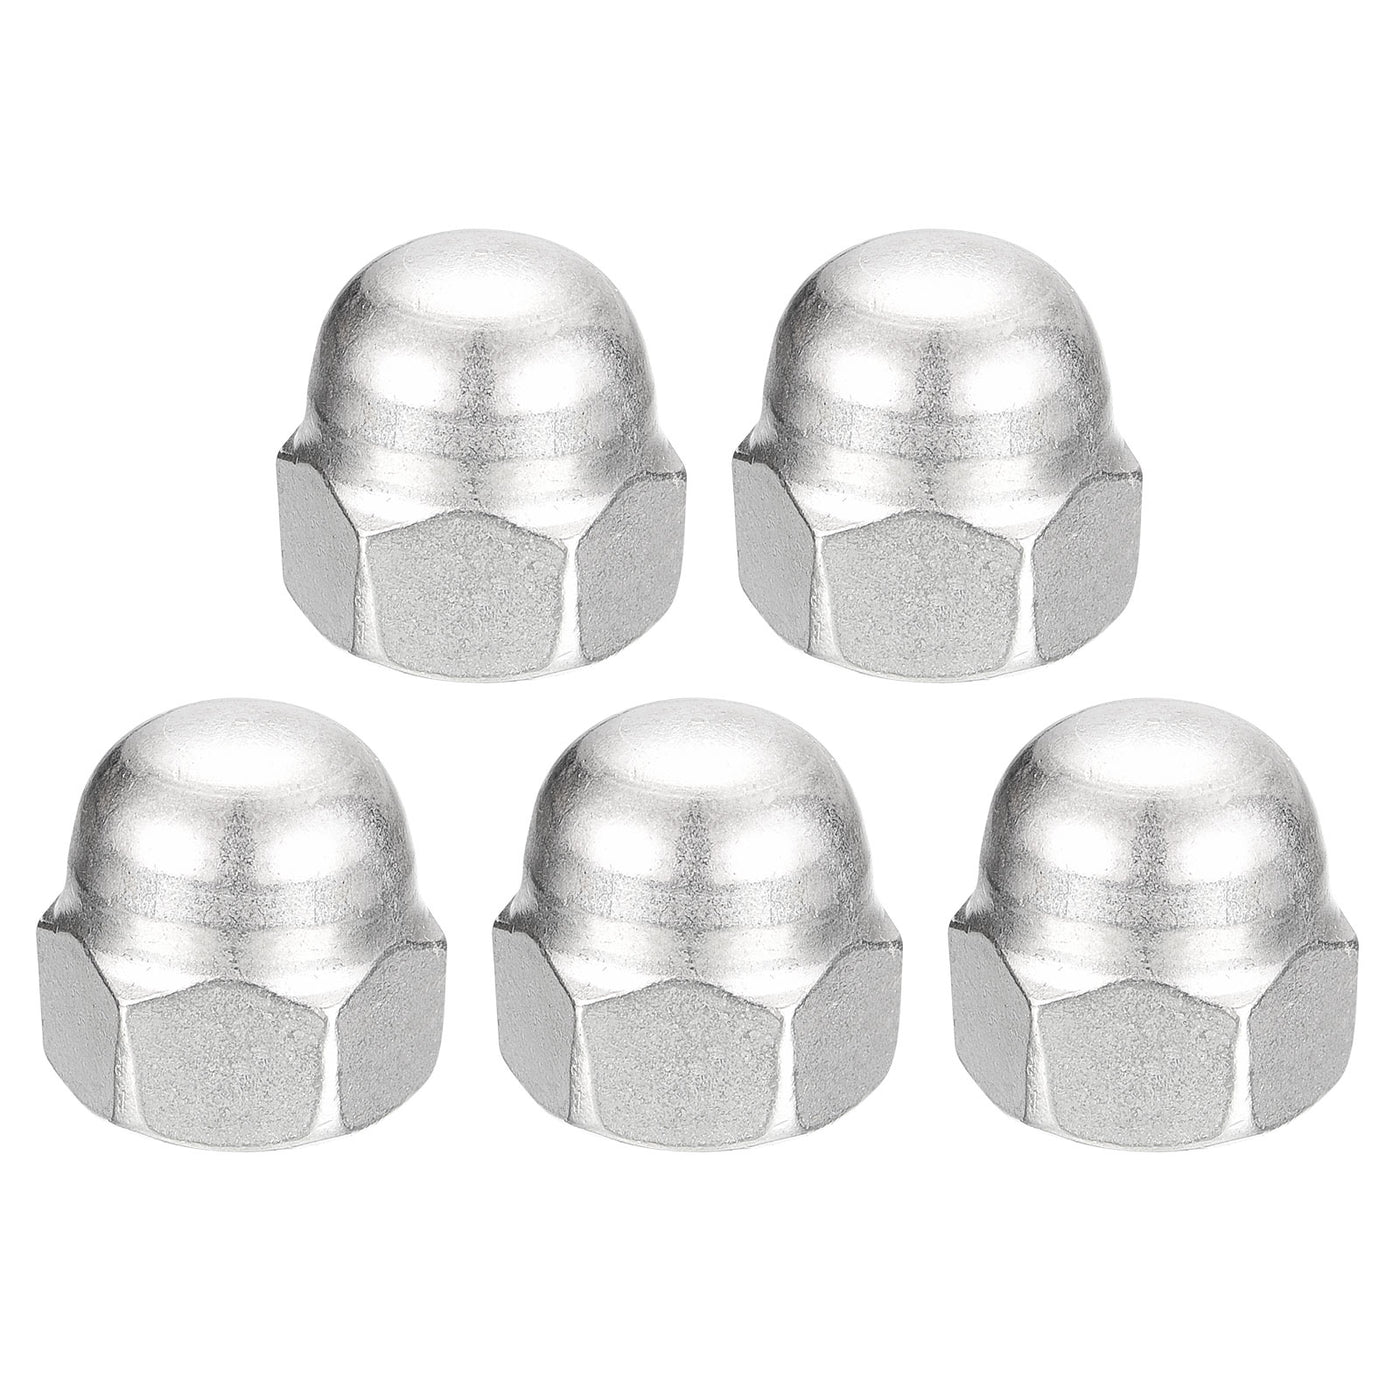 uxcell Uxcell 1/2-13 Acorn Cap Nuts,5pcs - 304 Stainless Steel Hardware Nuts, Acorn Hex Cap Dome Head Nuts for Fasteners (Silver)